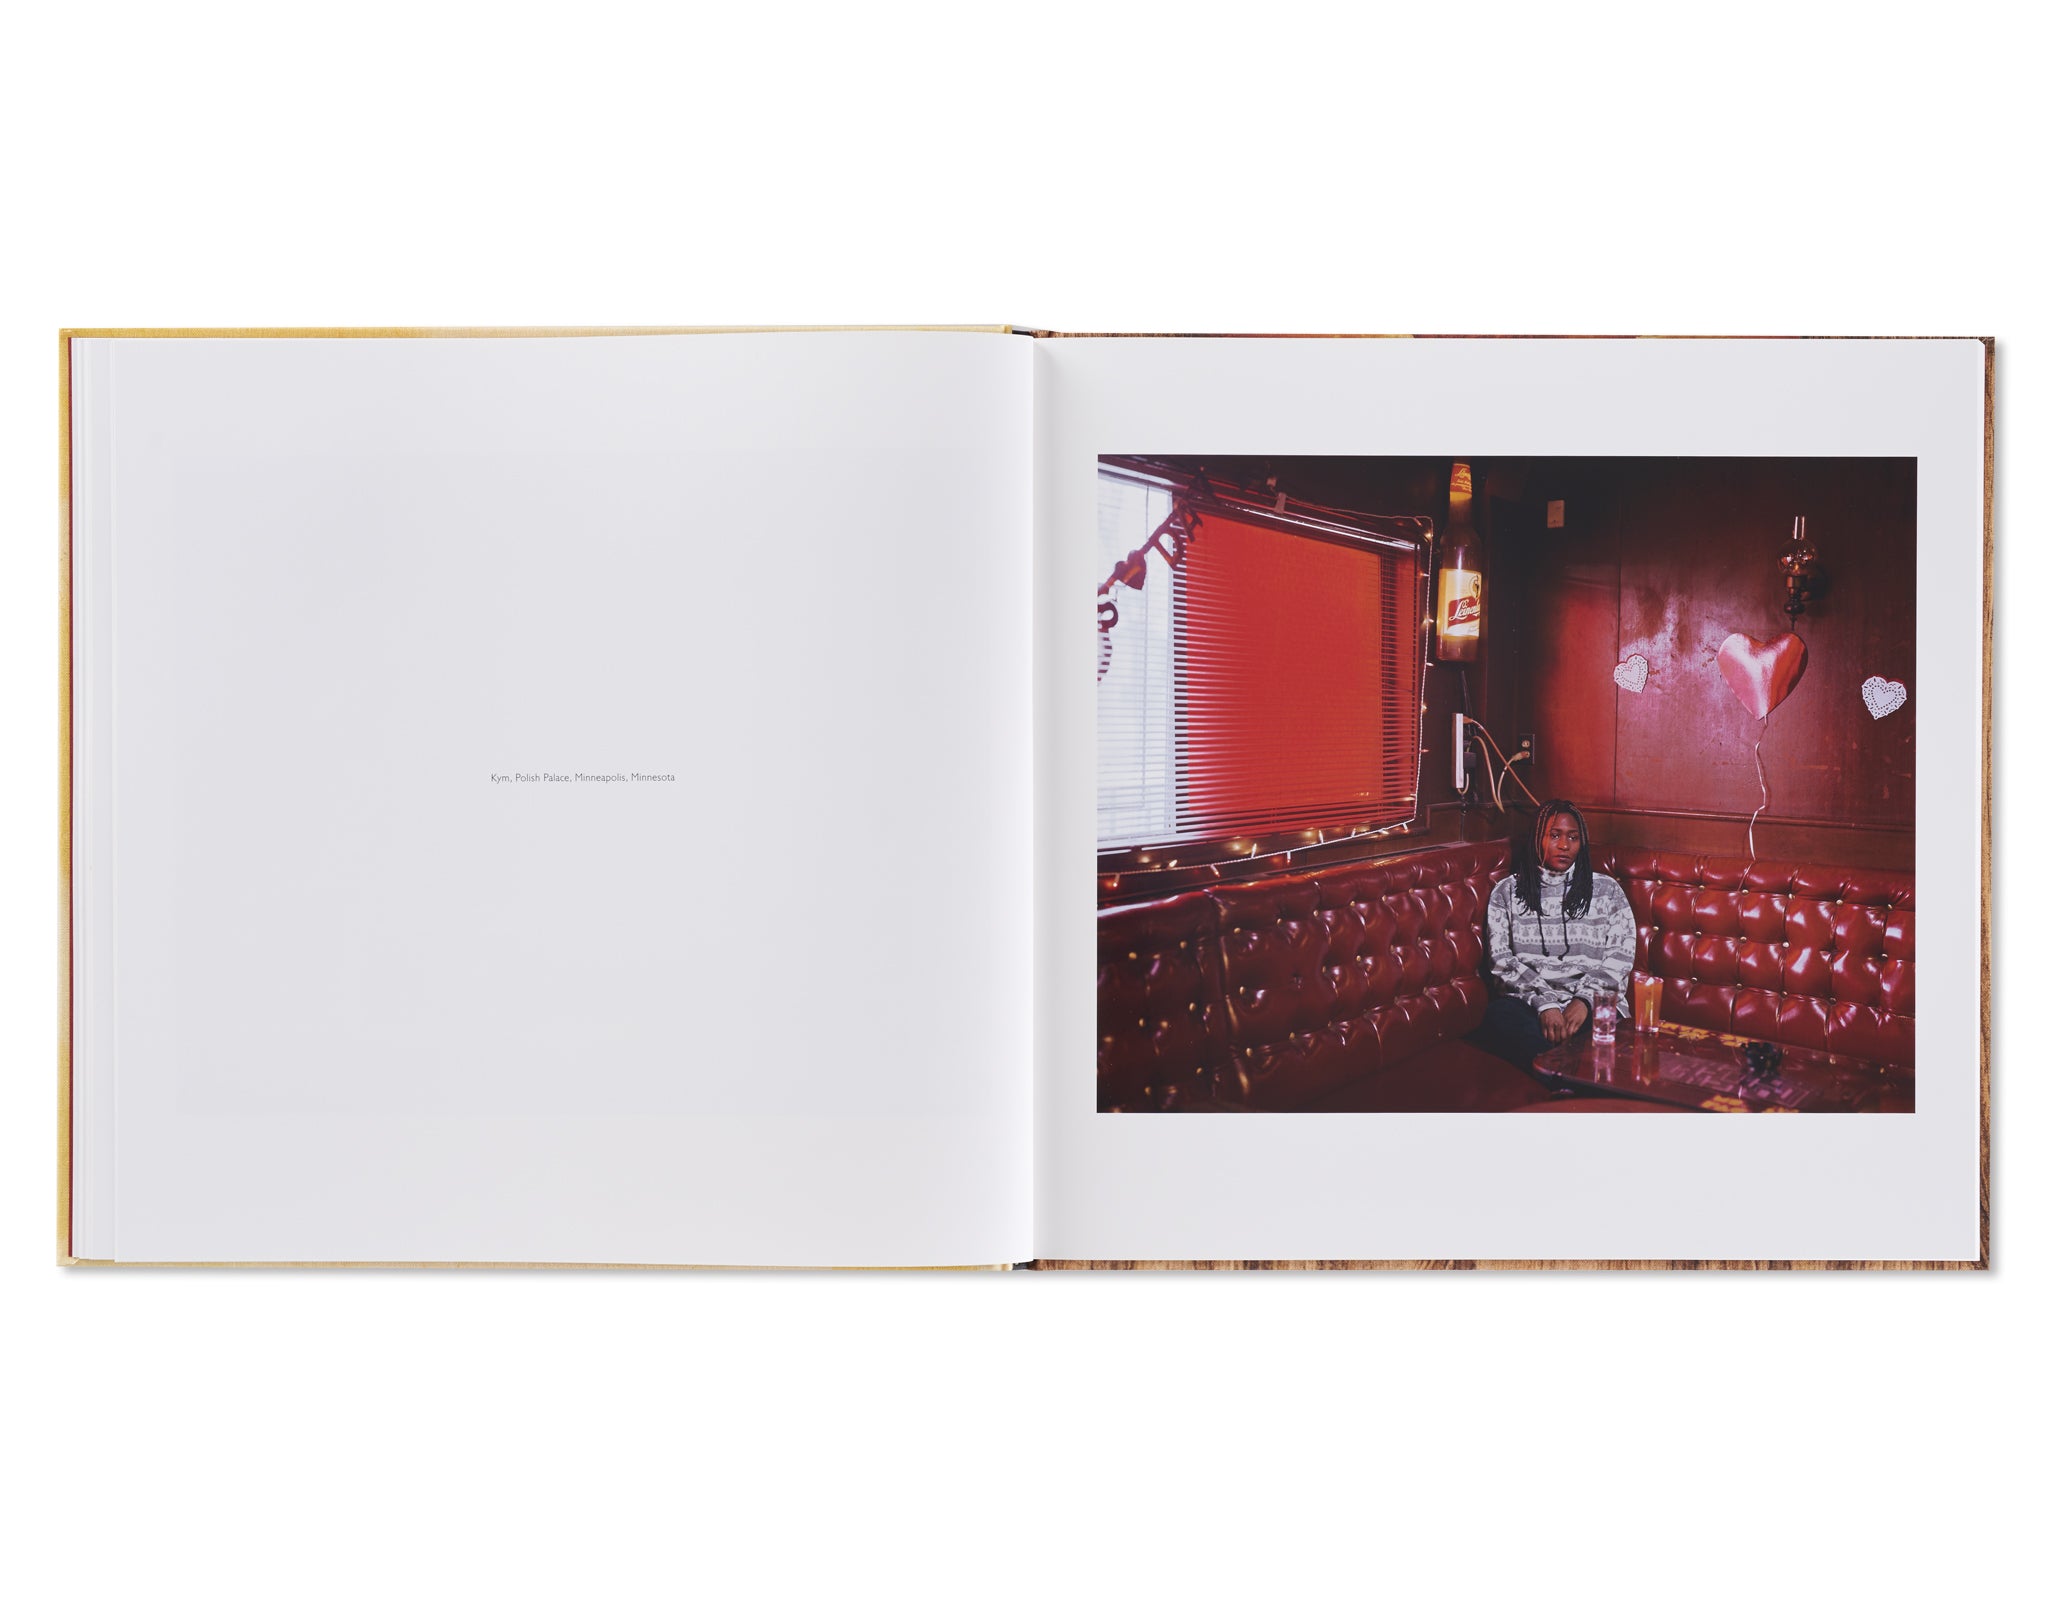 SLEEPING BY THE MISSISSIPPI by Alec Soth [SPECIAL EDITION 